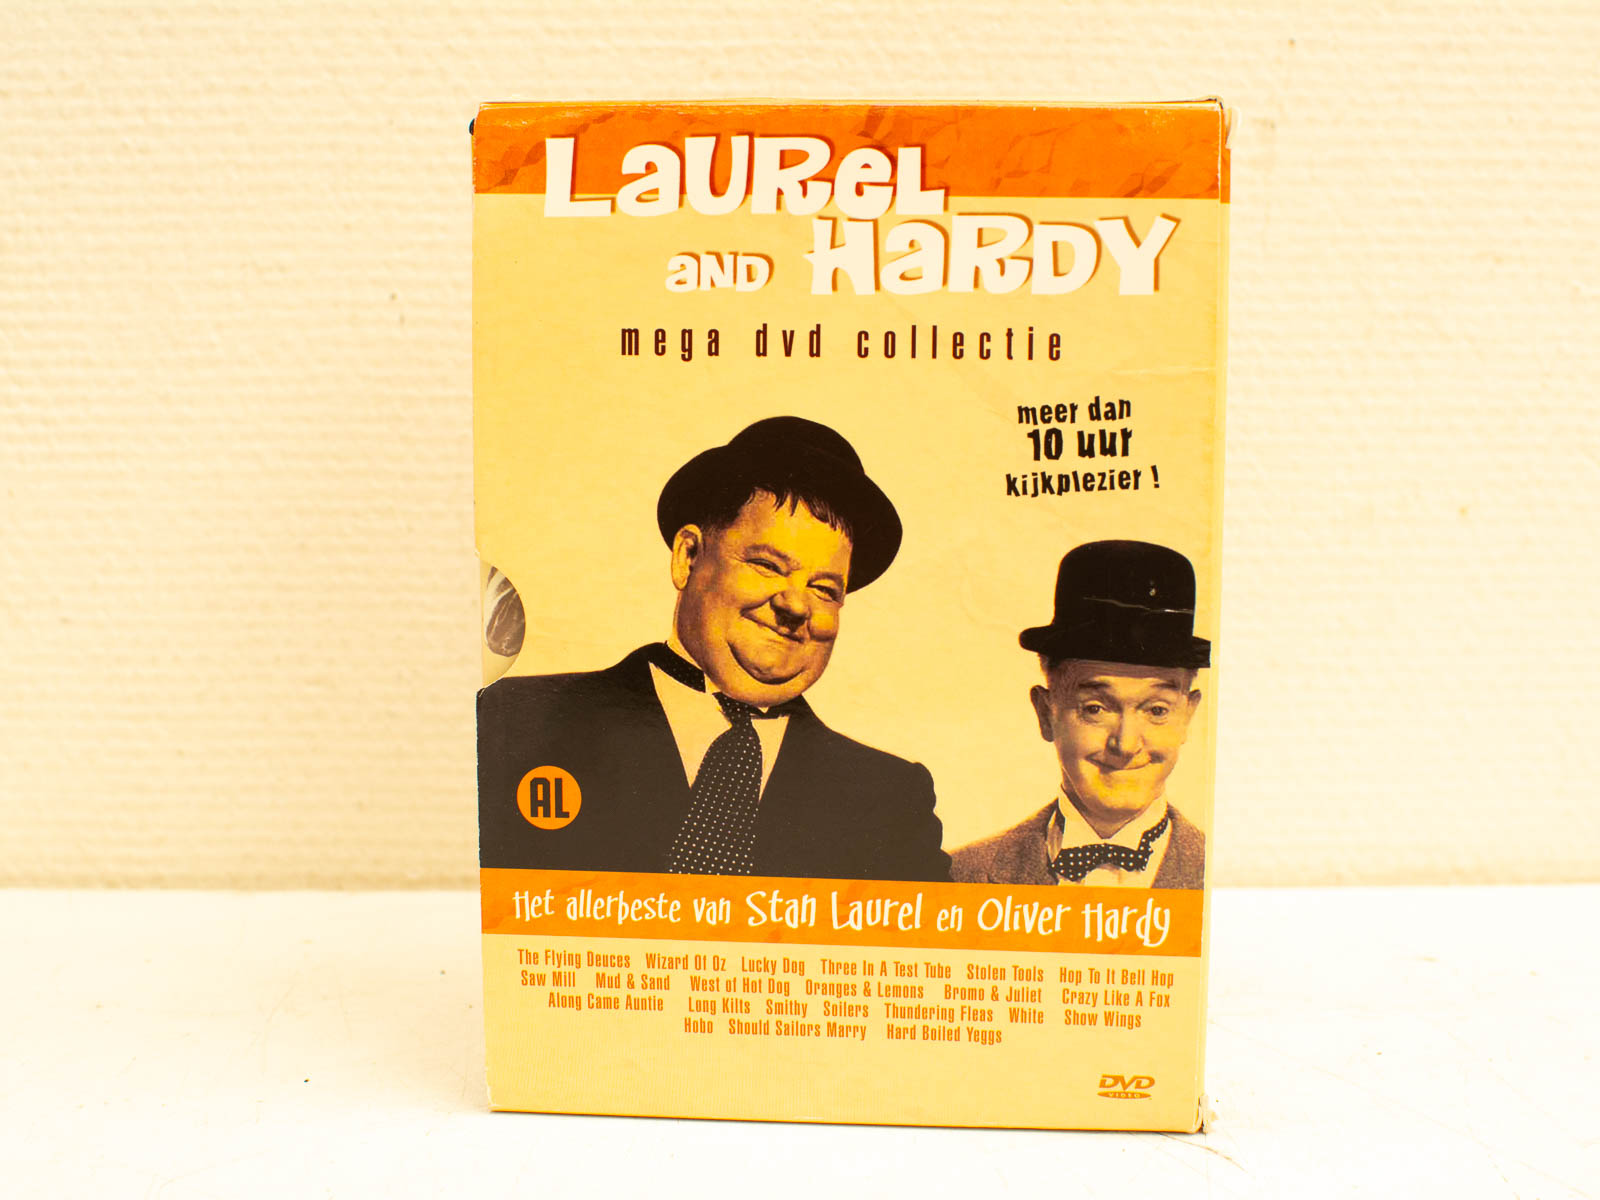 Mega dvd collectie  Laurel and Hardy  32469